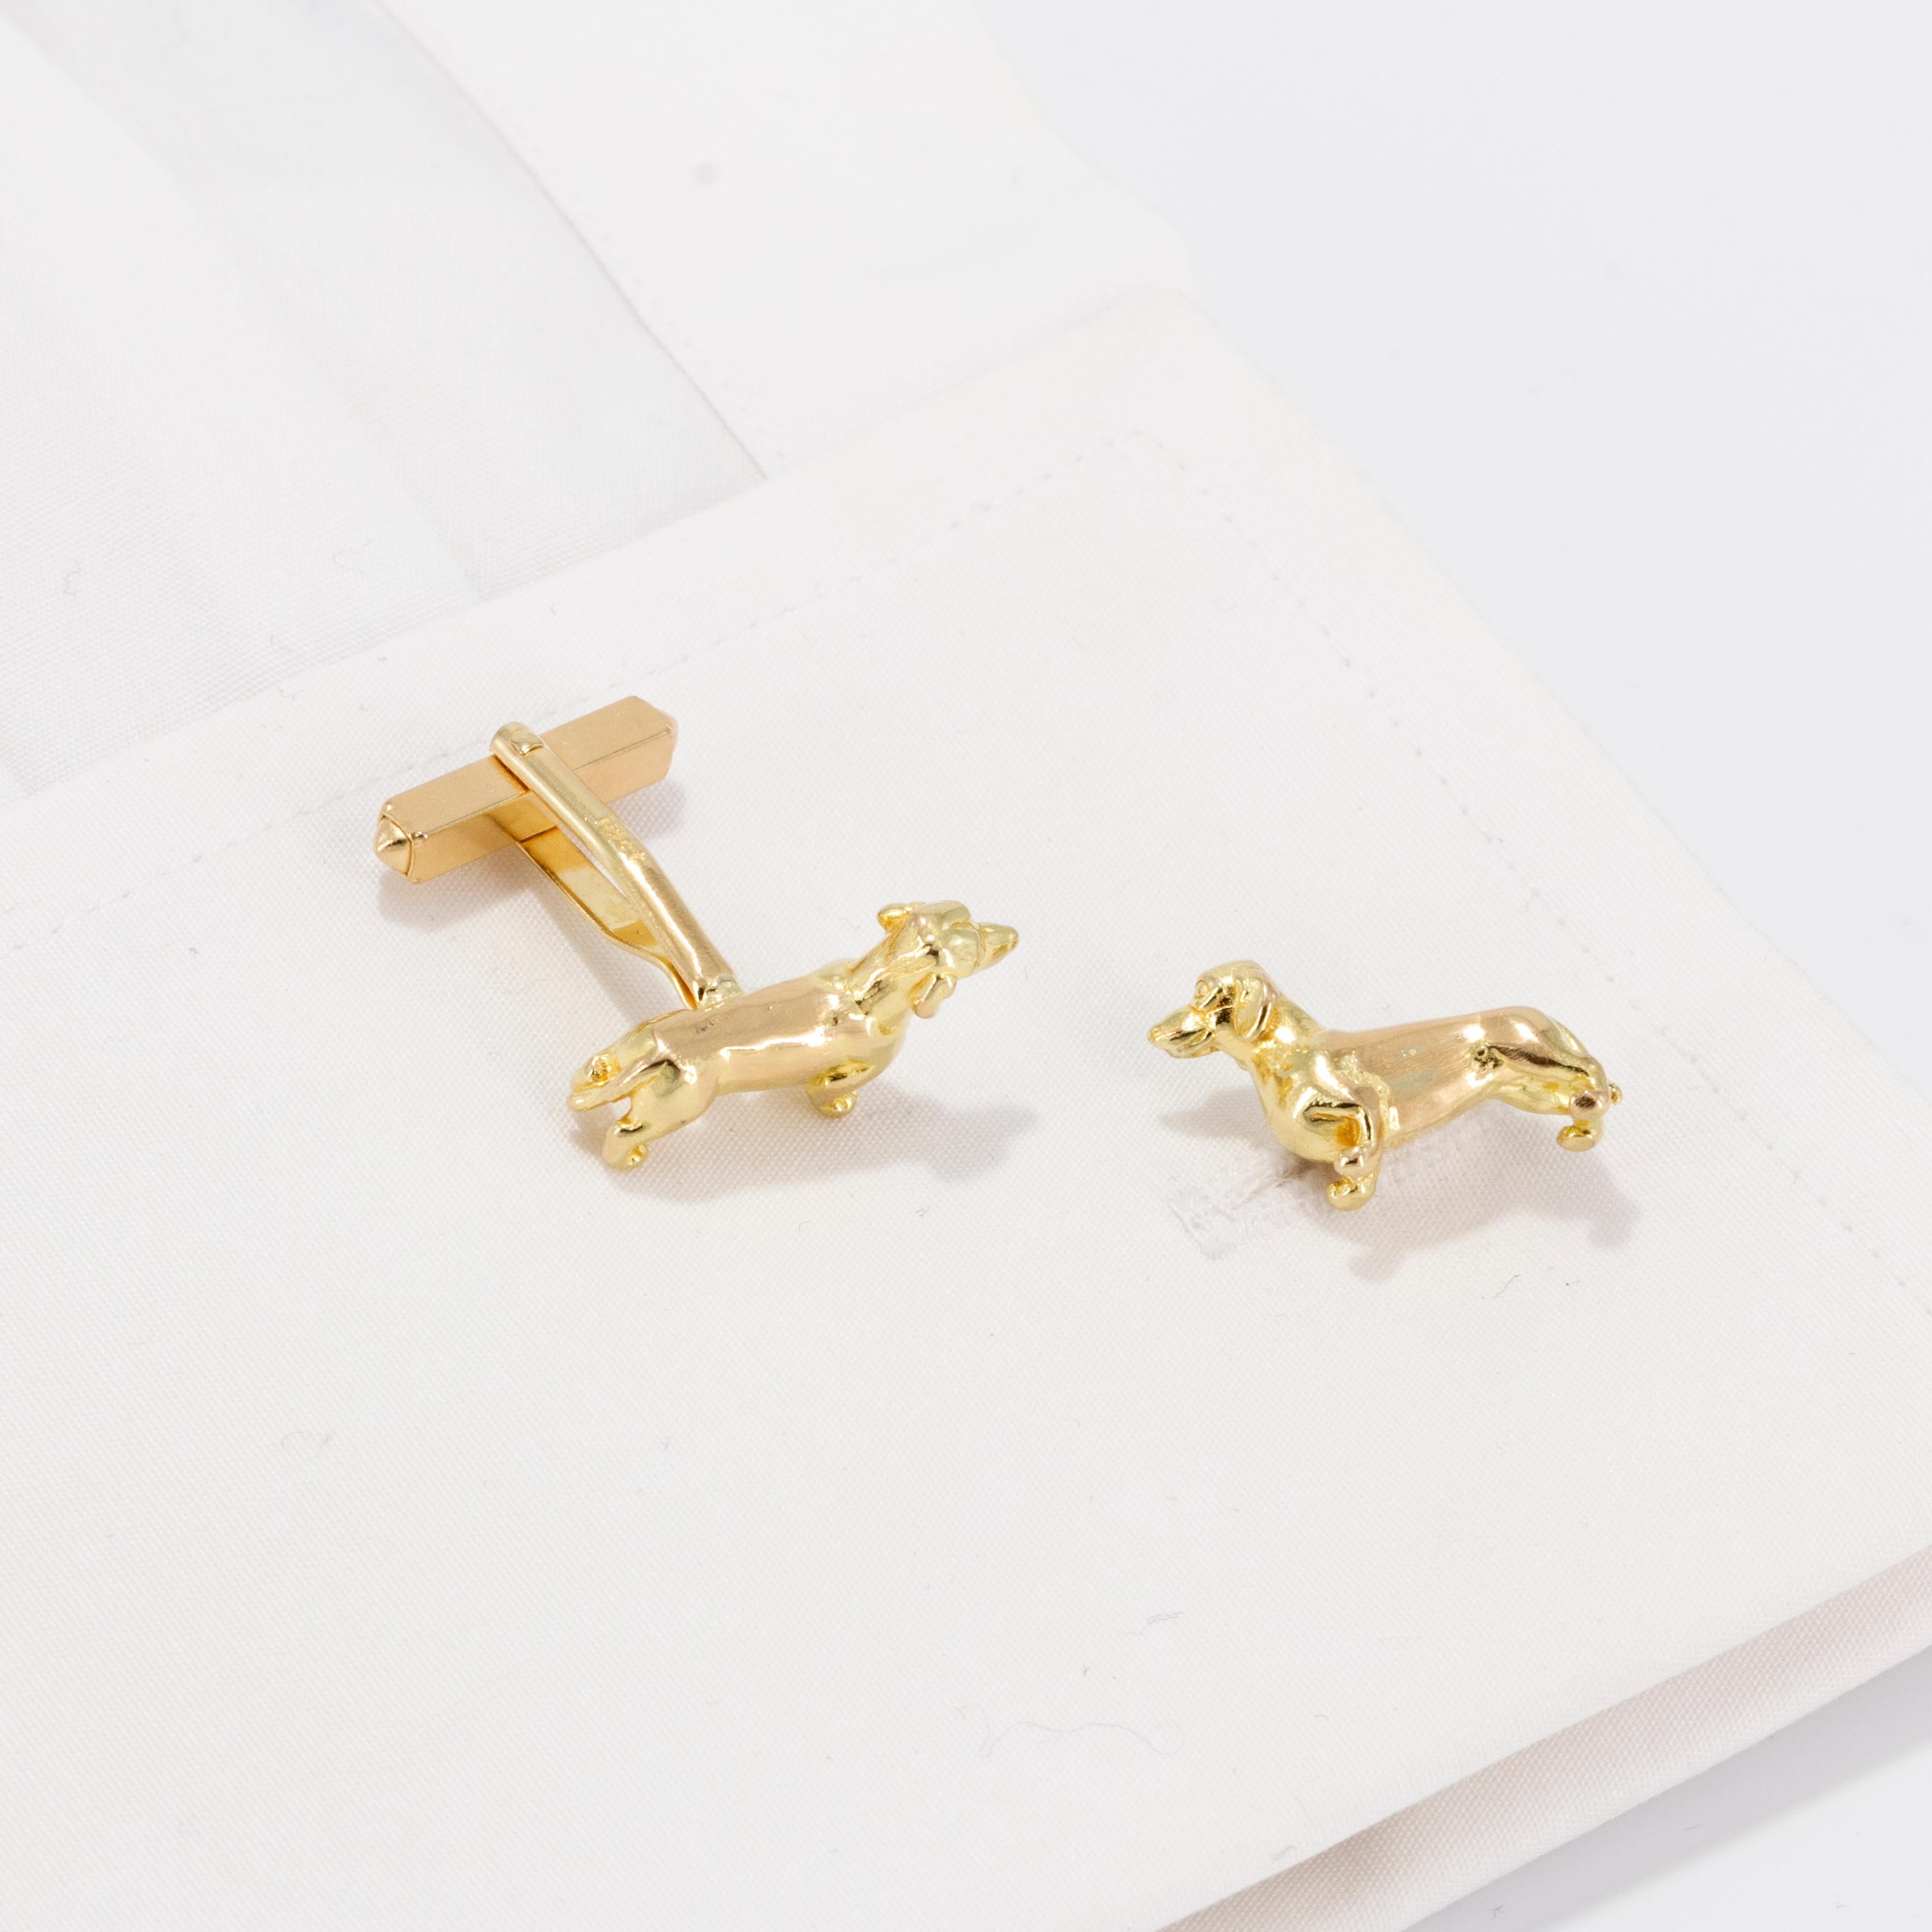 The lovable Dachshund as a stunning pair of cufflinks, made from solid 9K Gold.
These gorgeous cufflinks are ideal for the discerning gentleman fond of his beloved Dachshund. This realistic mini sculpture is made in Surrey by Simon Kemp, a third